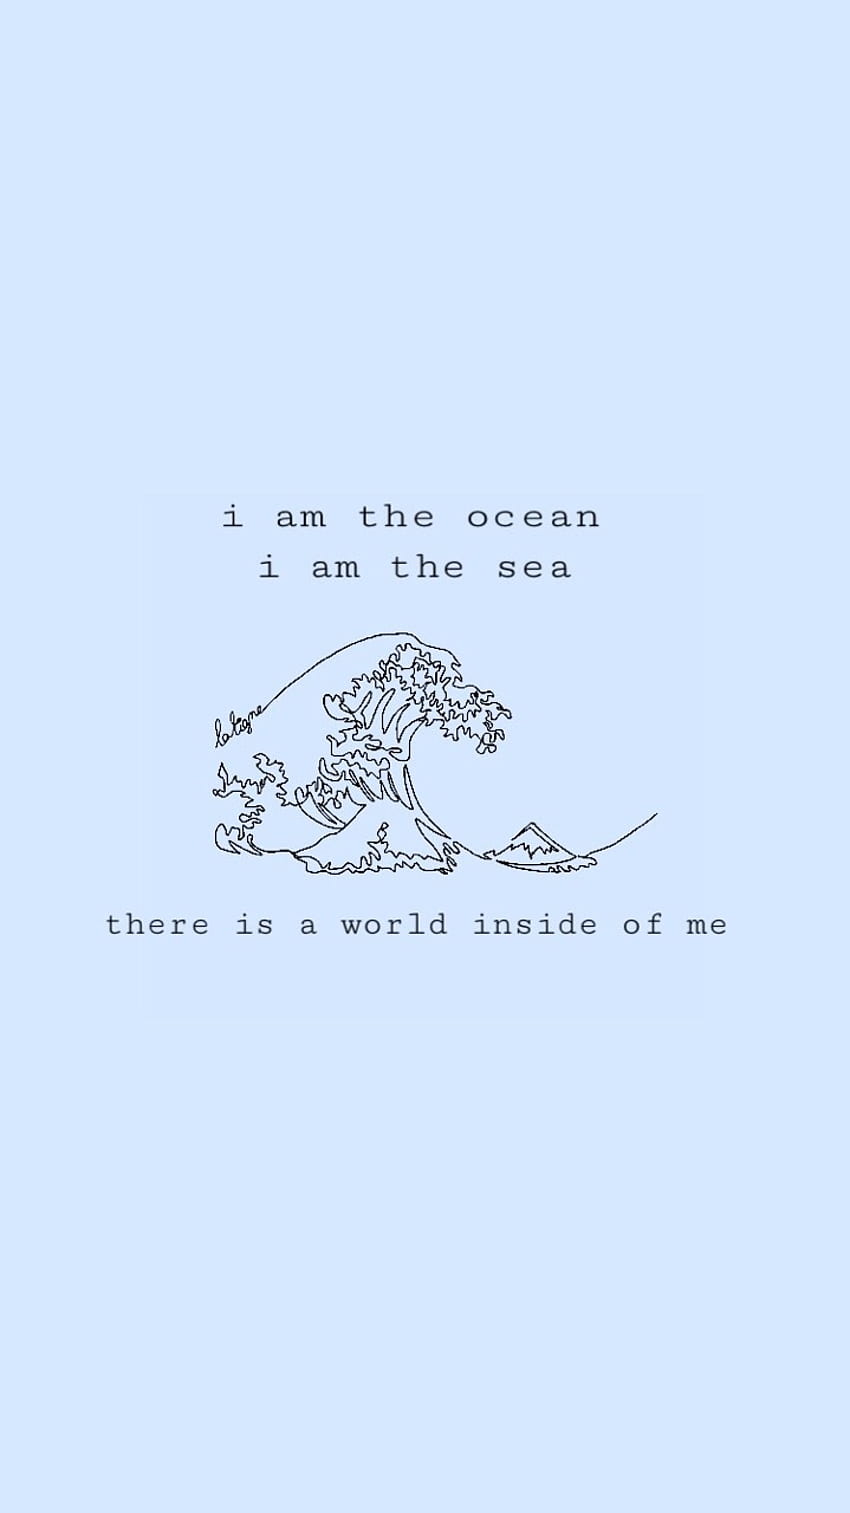 I am the ocean, and there is a world inside of me - Elephant